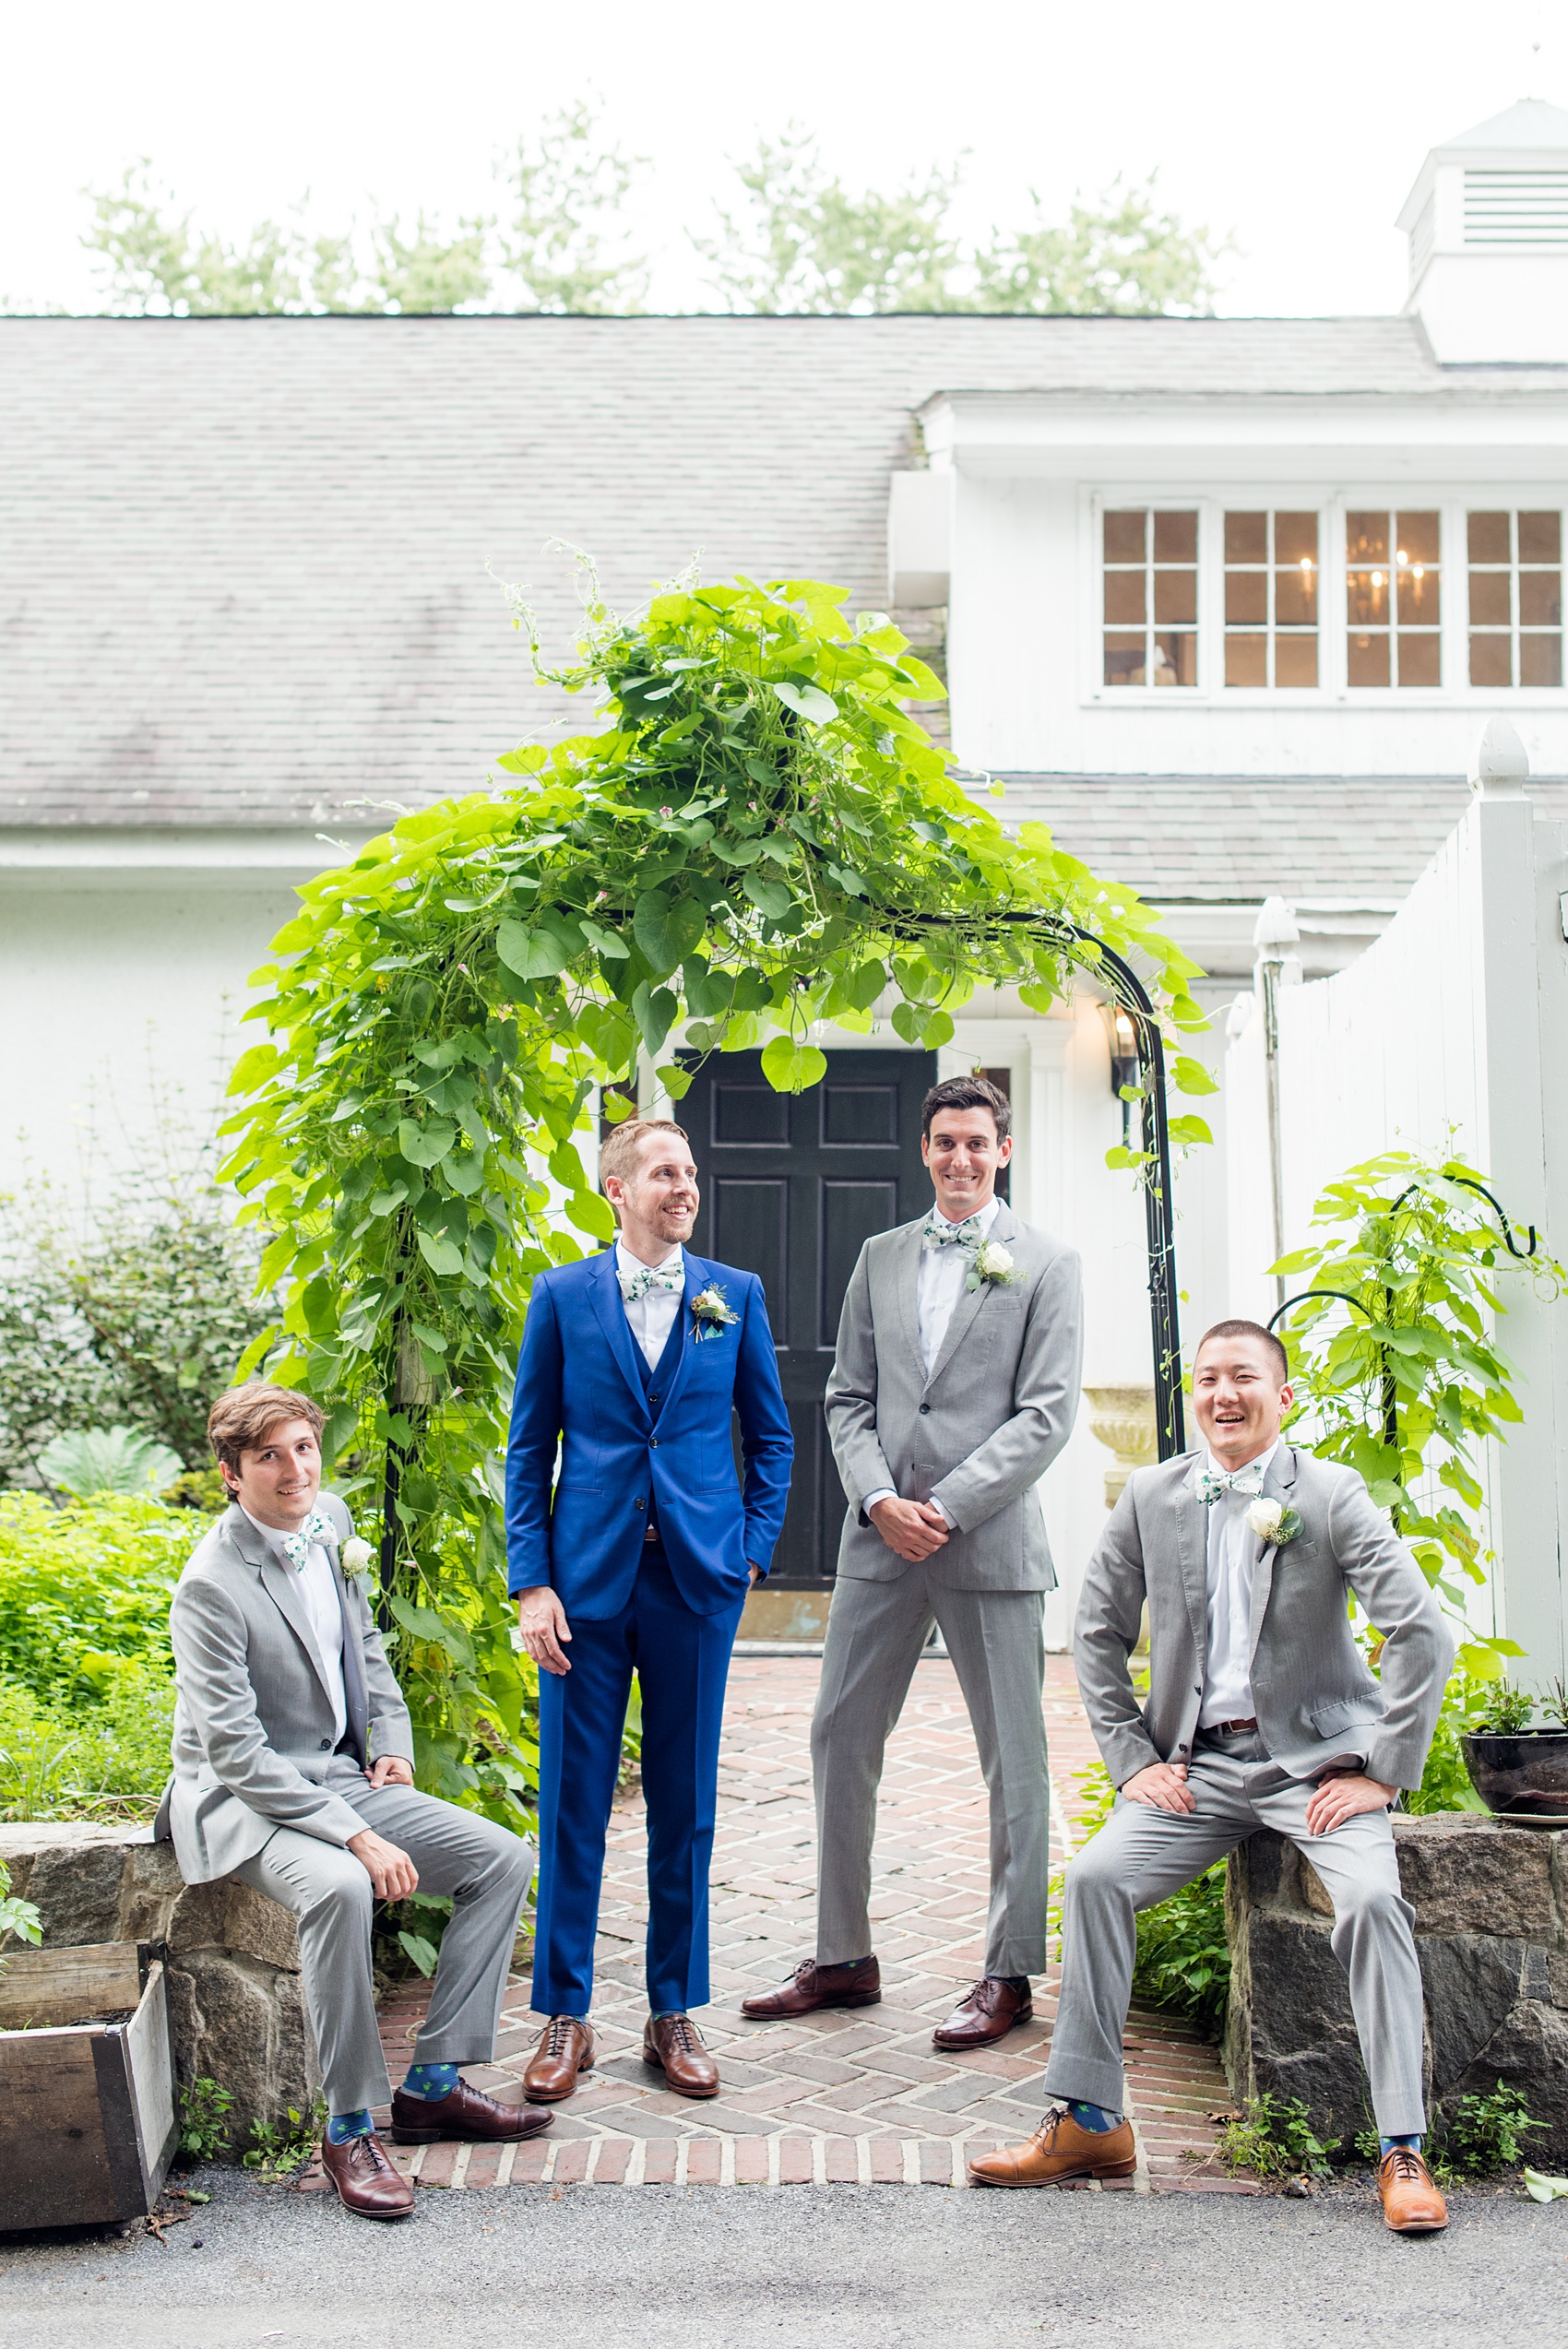 Wedding photos at Crabtree's Kittle House in Chappaqua, New York by Mikkel Paige Photography. This venue in Westchester county was a beautiful location to capture summer wedding pictures, with the groomsmen in grey suits and matching green and white pattern bow ties. The groom wore a custom blue suit. The historic home is very close to NYC and great for a wedding outside the city. Click through for more wedding inspiration from their day! #mikkelpaige #CrabtreesKittleHouse #WestchesterWeddingVenues #WestchesterWedding #summerwedding #groomsmen #weddingparty #patternbowties 